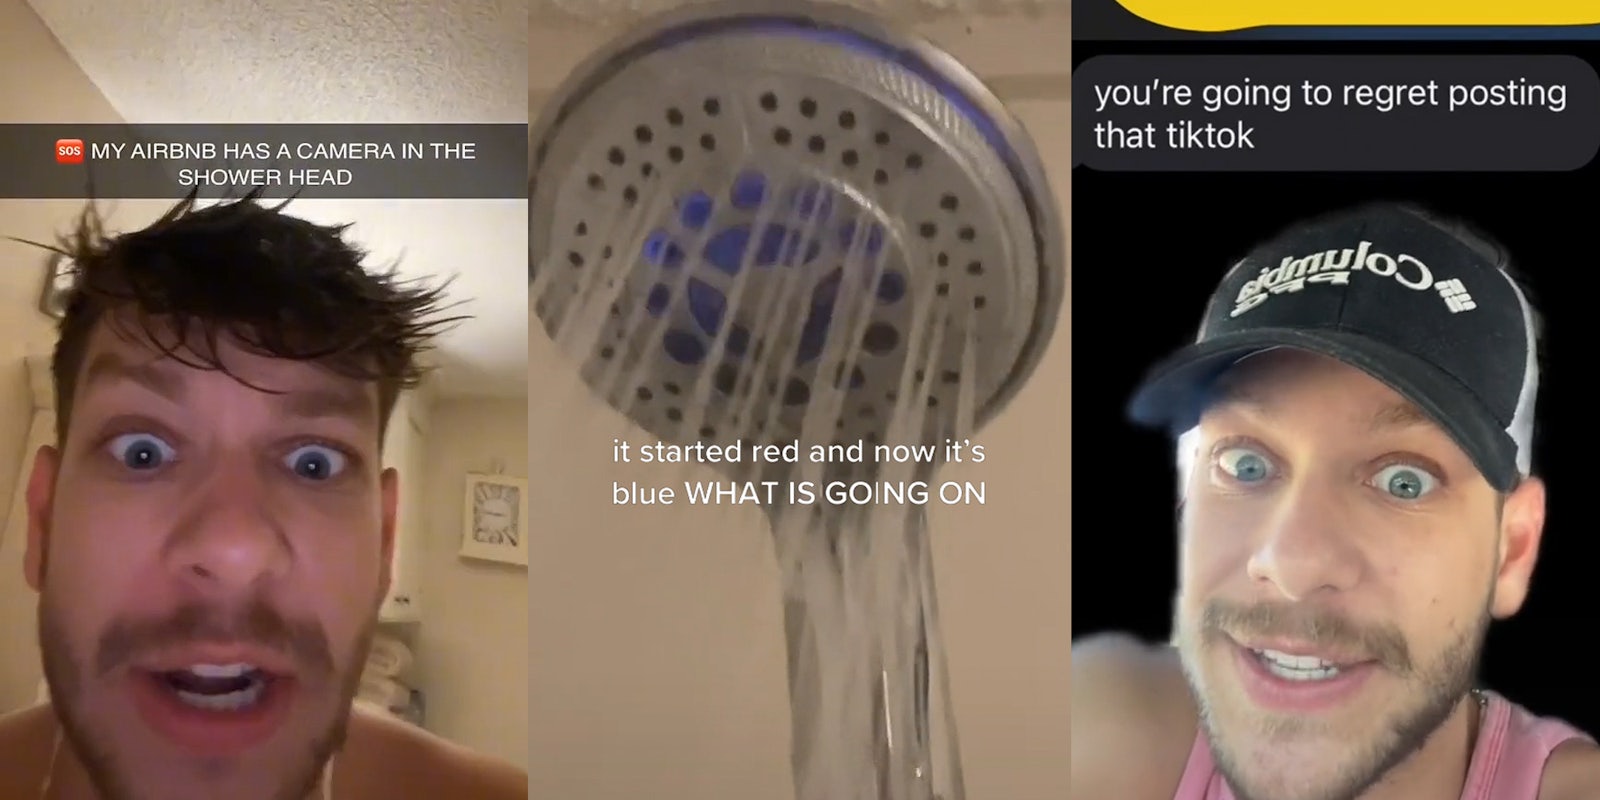 man speaking socked shirtless caption 'MY AIRBNB HAS A CAMERA IN THE SHOWER HEAD' (l) shower head with g=blue light on caption 'it started red and now it's blue WHAT IS GOING ON' (c) man greenscreen tiktok speaking shocked expression over messages caption 'you're going to regret posting that tiktok' (r)